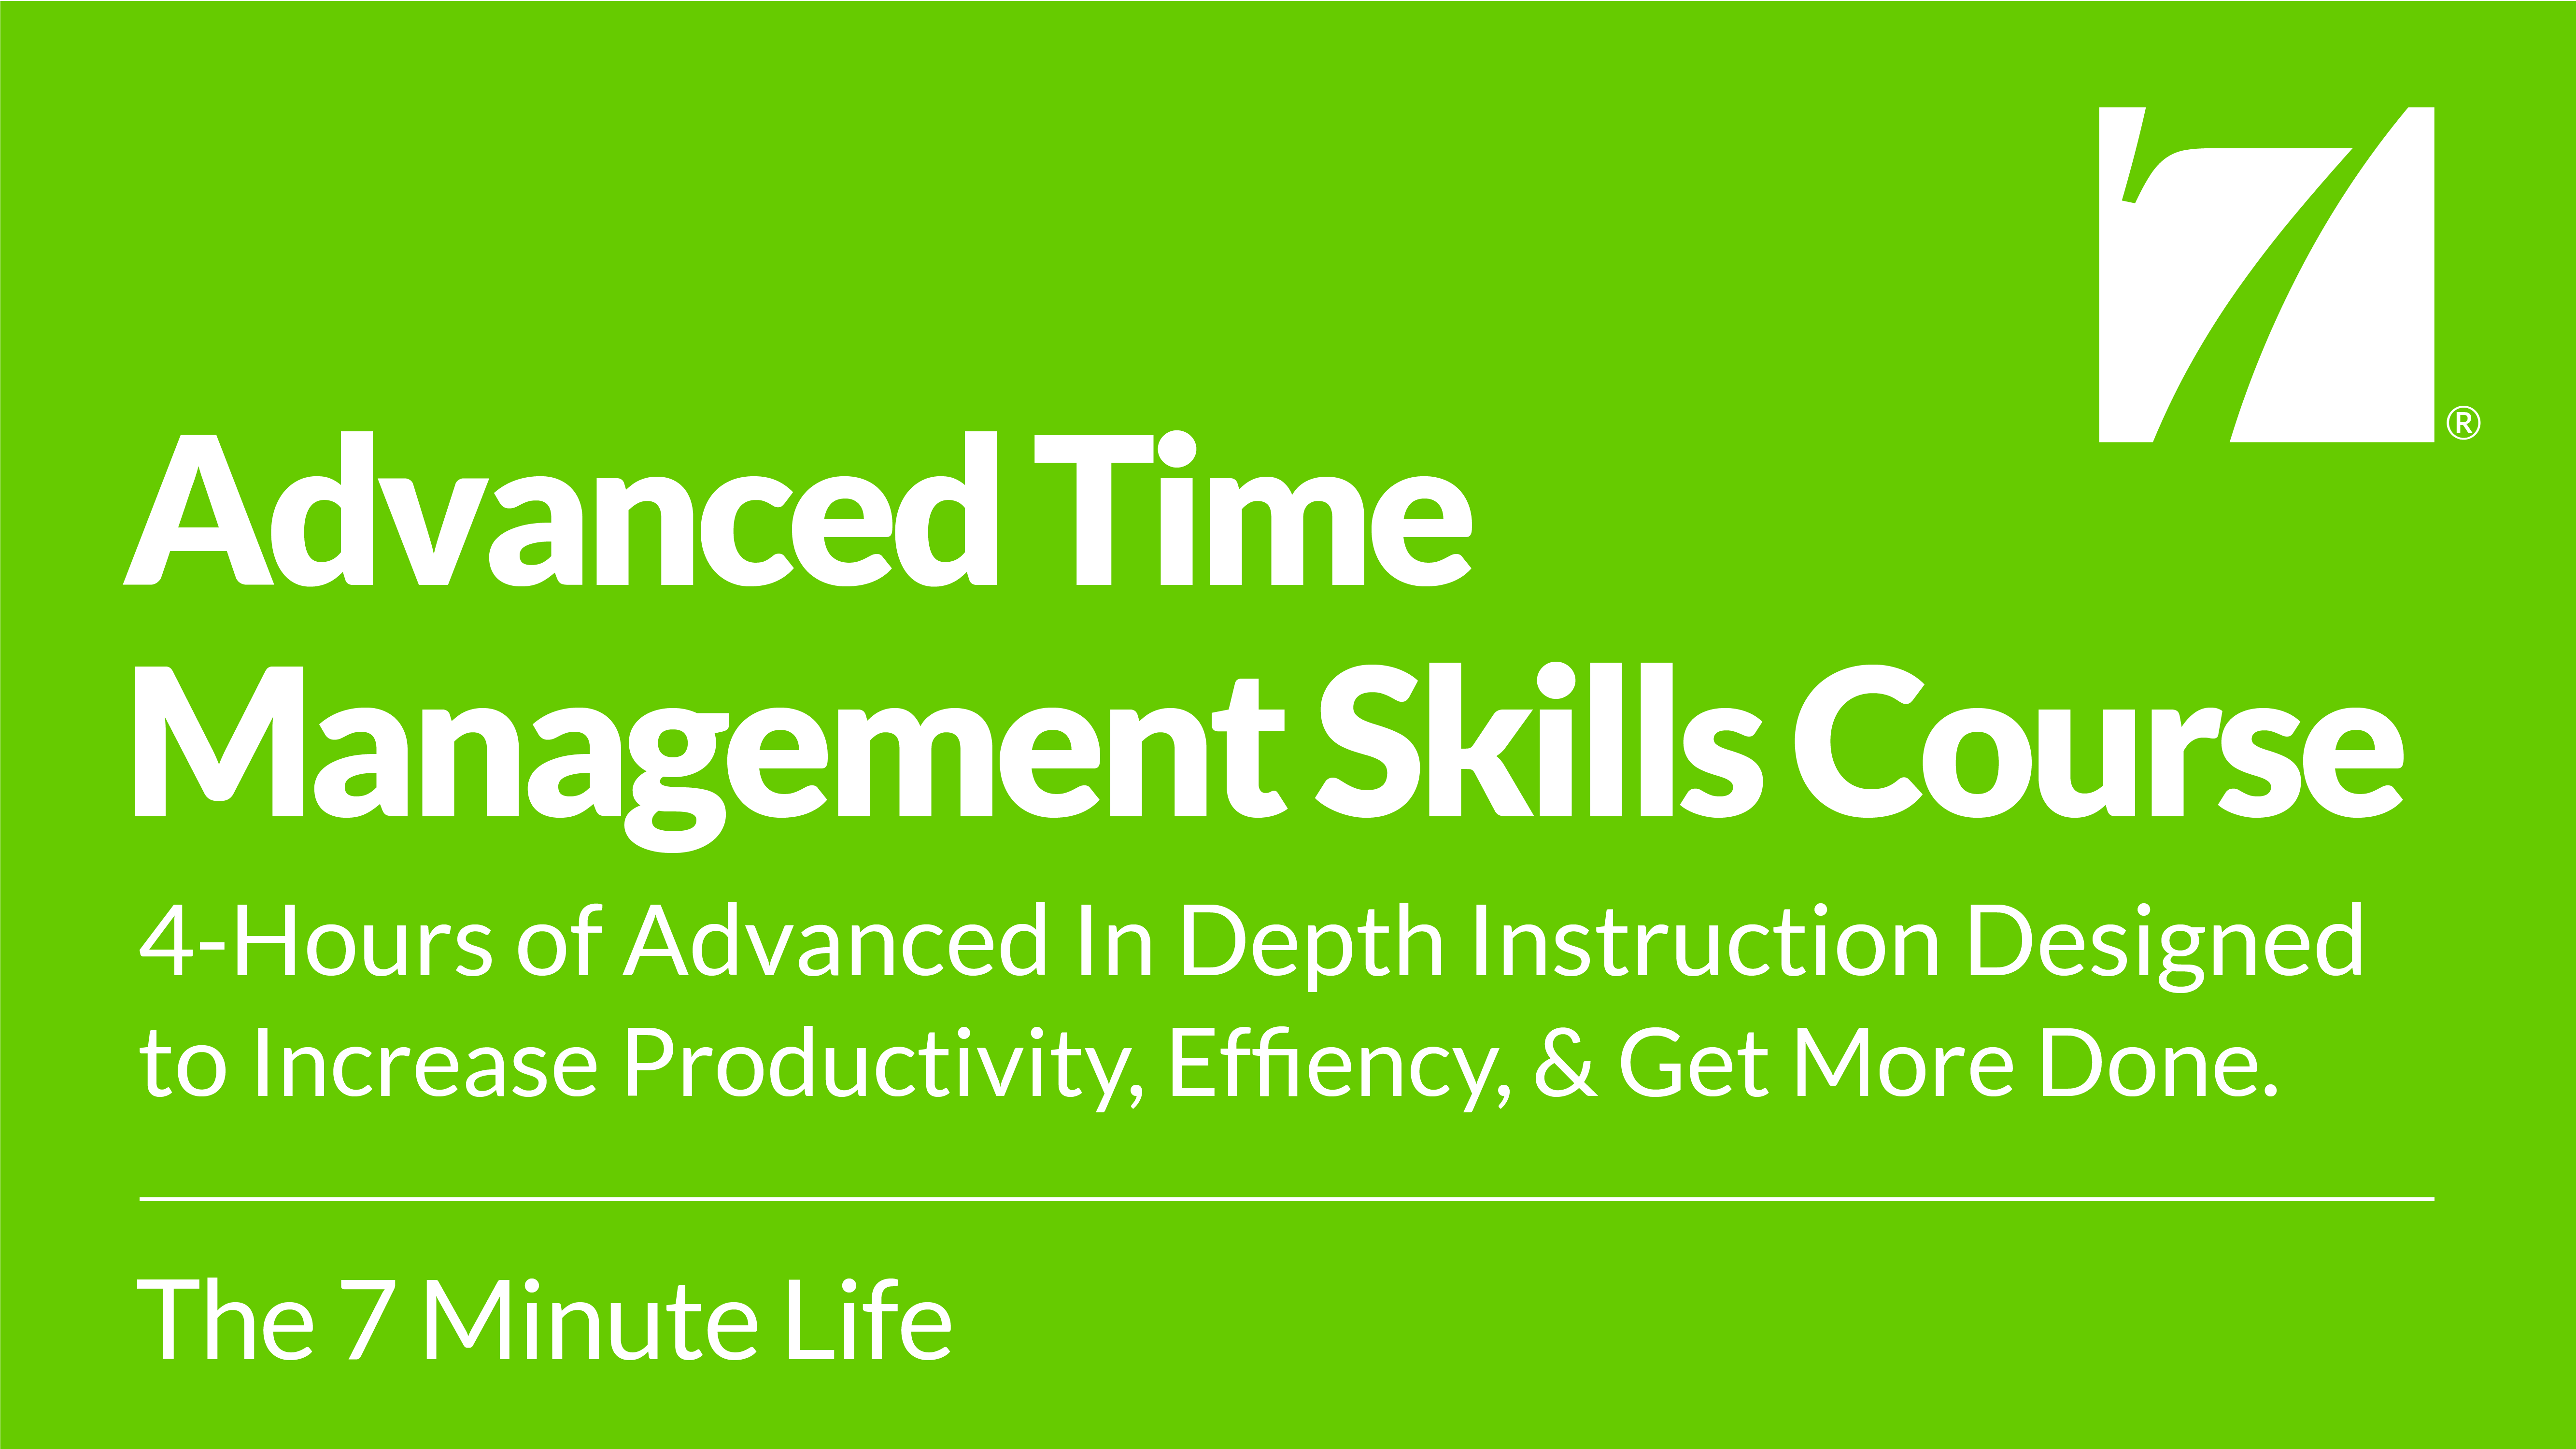 Advanced Time Management Skills How to Use Tools Thumbnail 121322 01